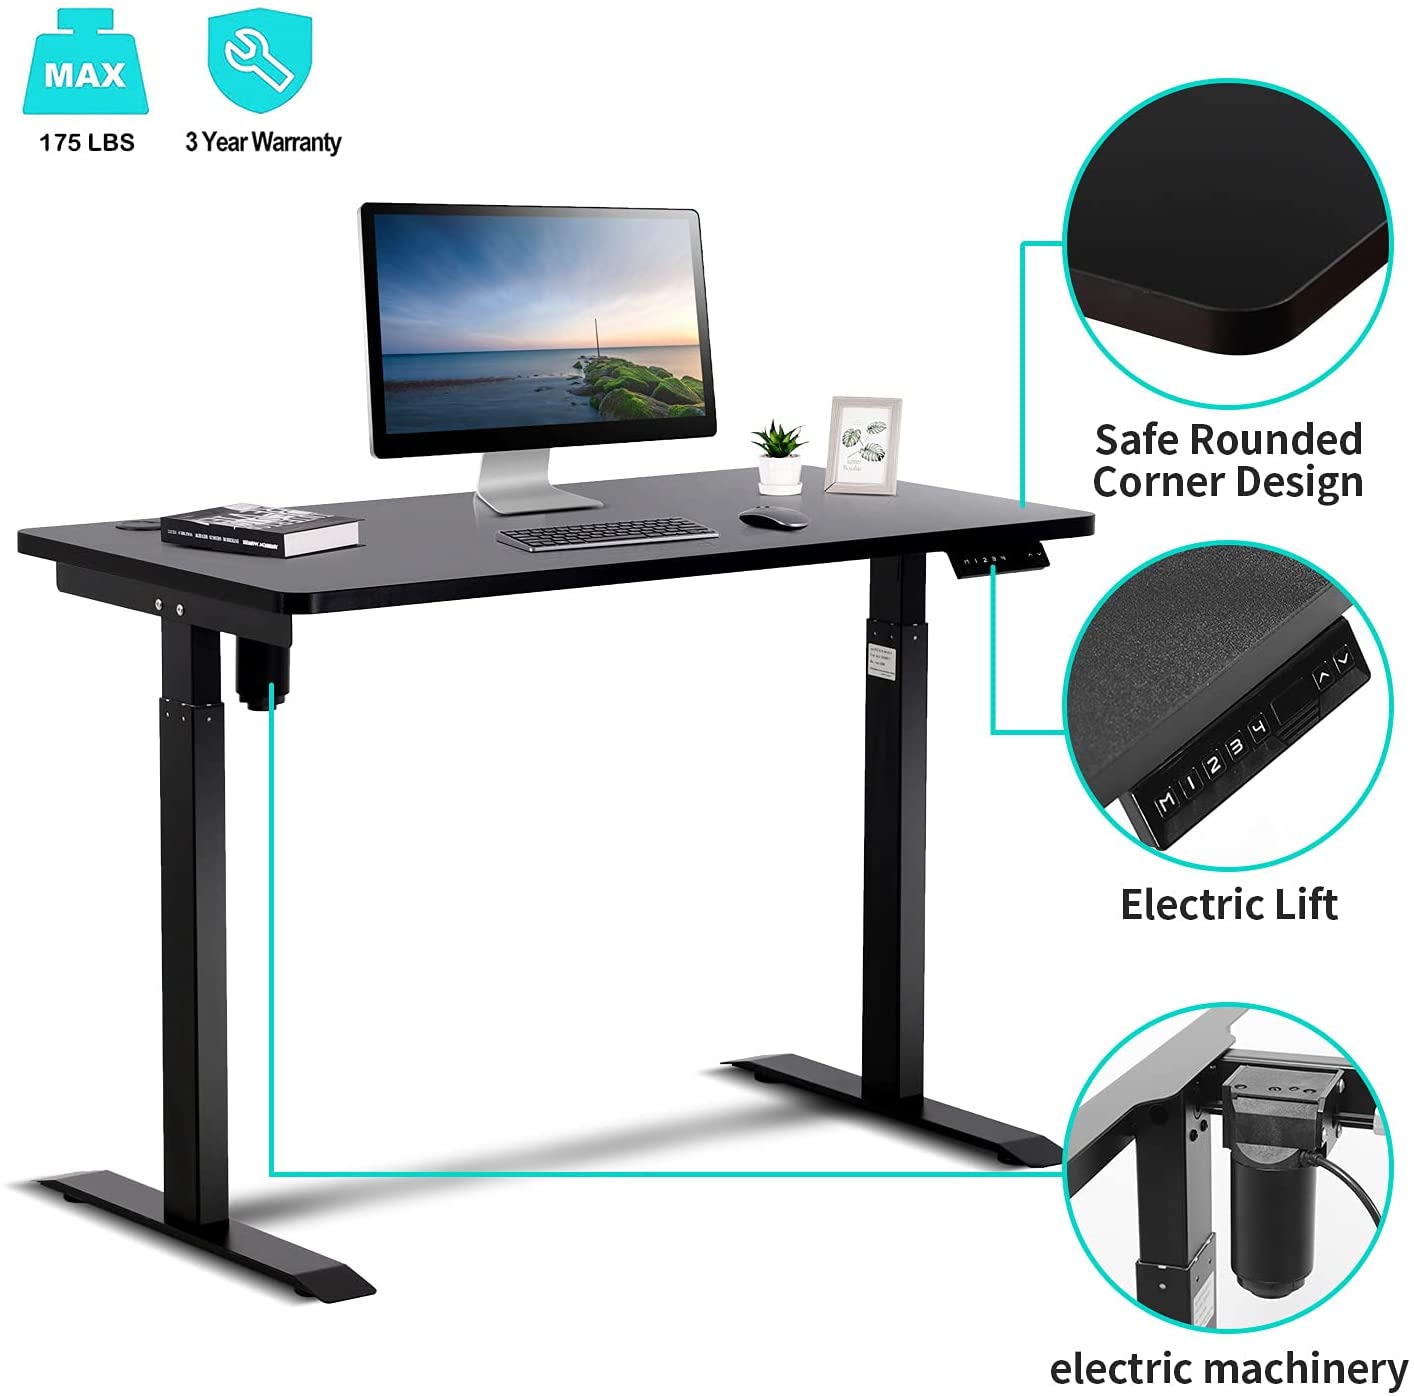 UNICOO – Height Adjustable Electric Standing Desk, 47.24 x 23.62 Inches Stand up Table, Sit Stand Home Office Desk with One Piece Tabletop (NTESMF01 + 48 in TOP)